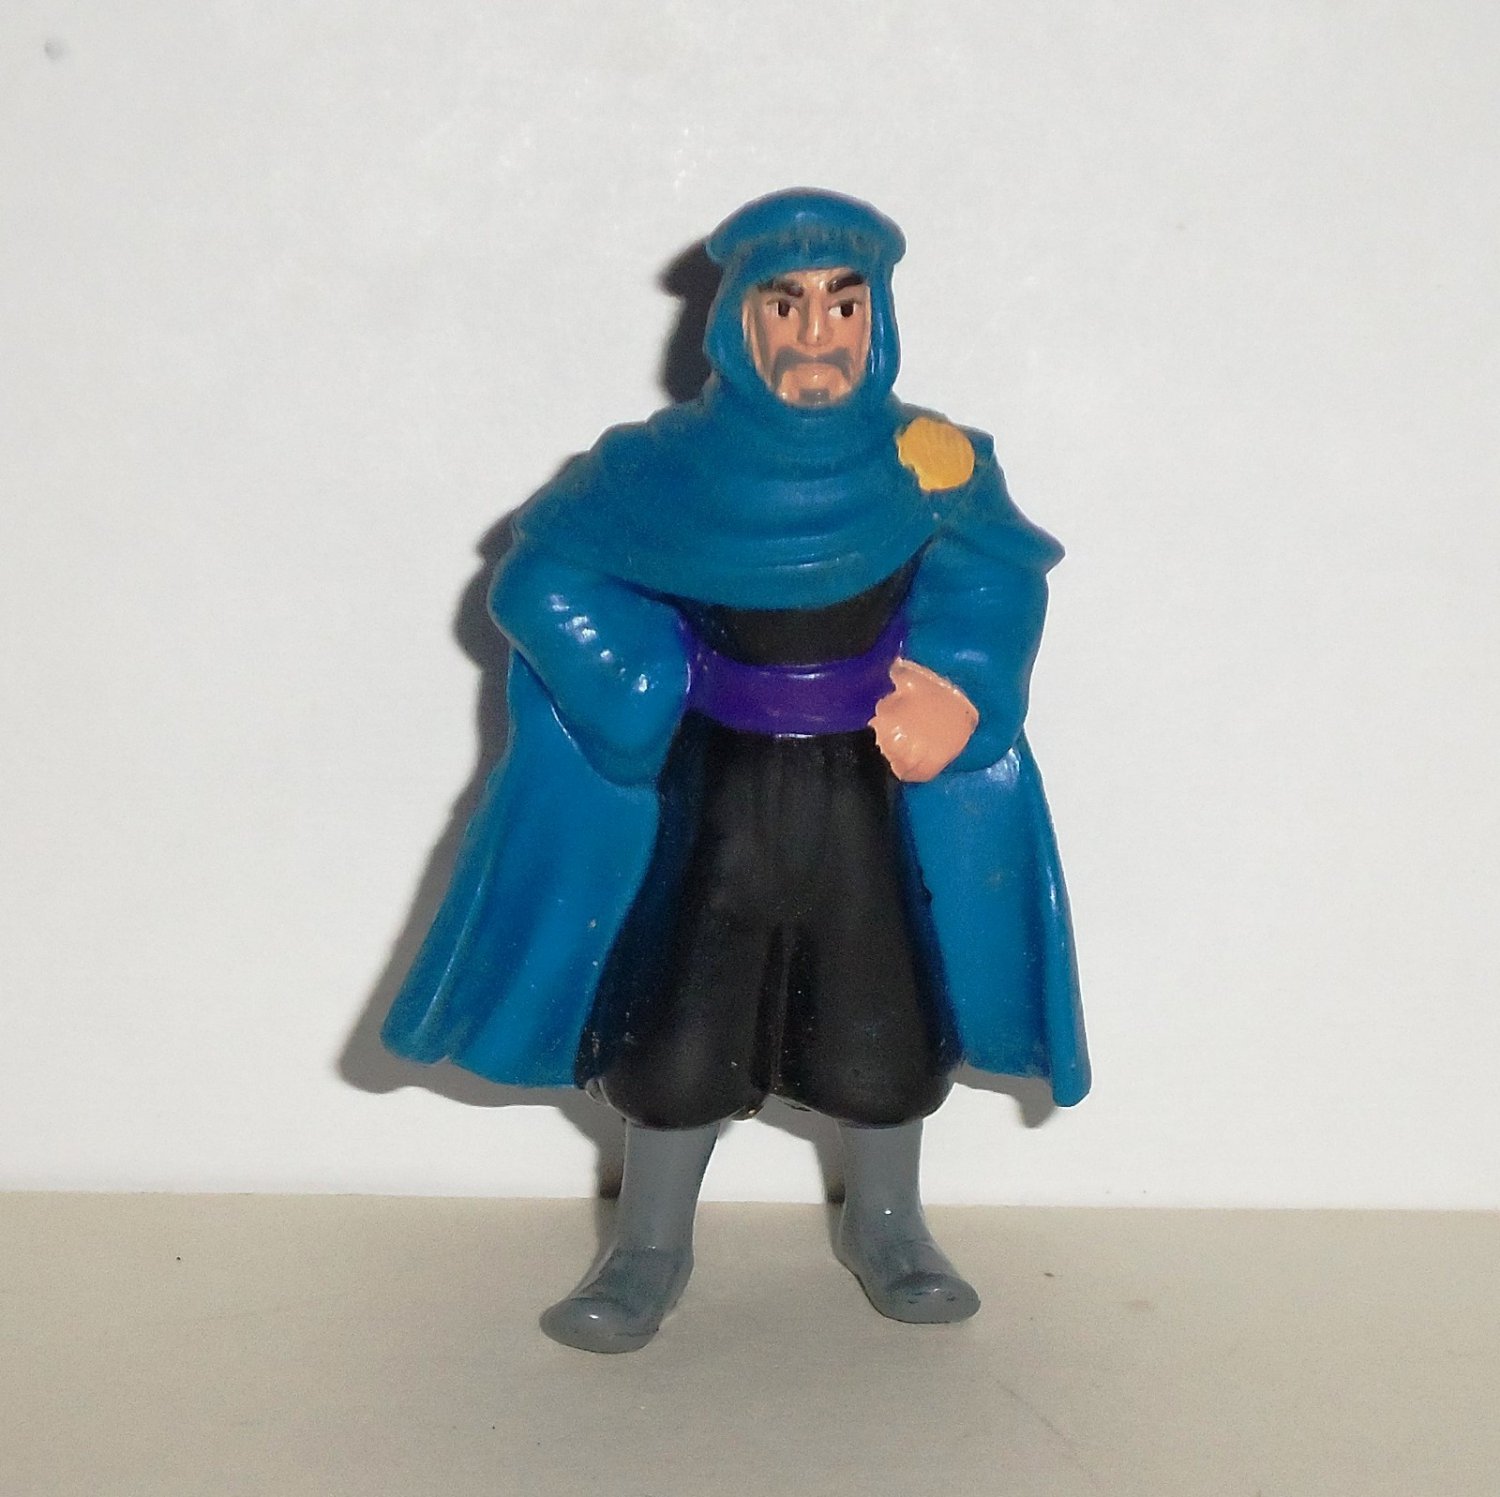 Details about   1996 McDonald's Aladdin King of Thieves Cassim Toy #1 in Packaging 